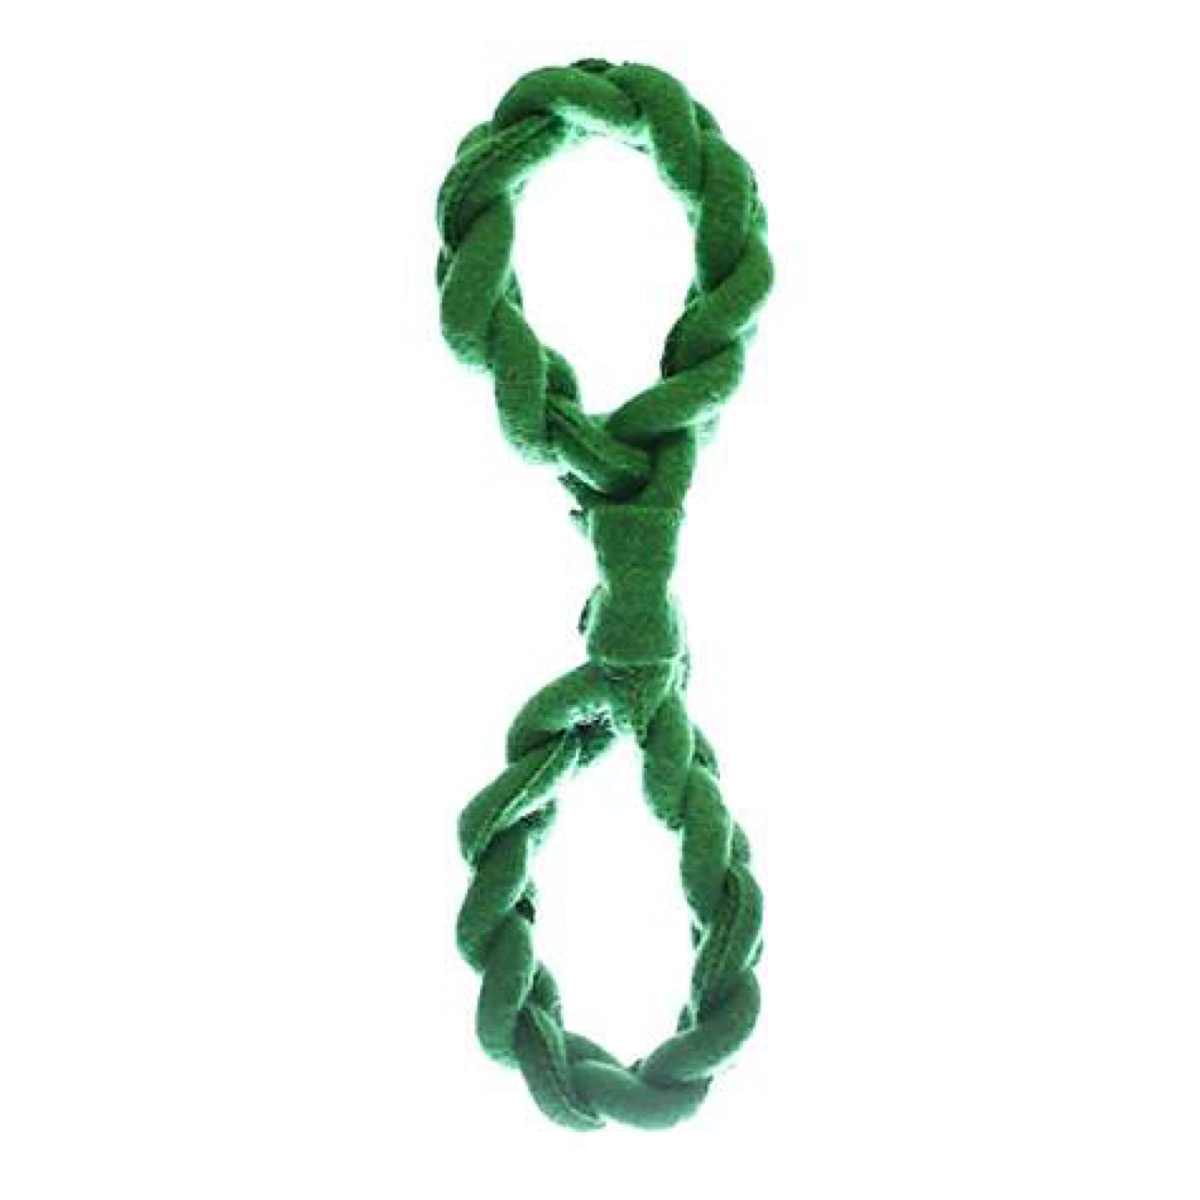 green dog rope, best chew toys for puppies